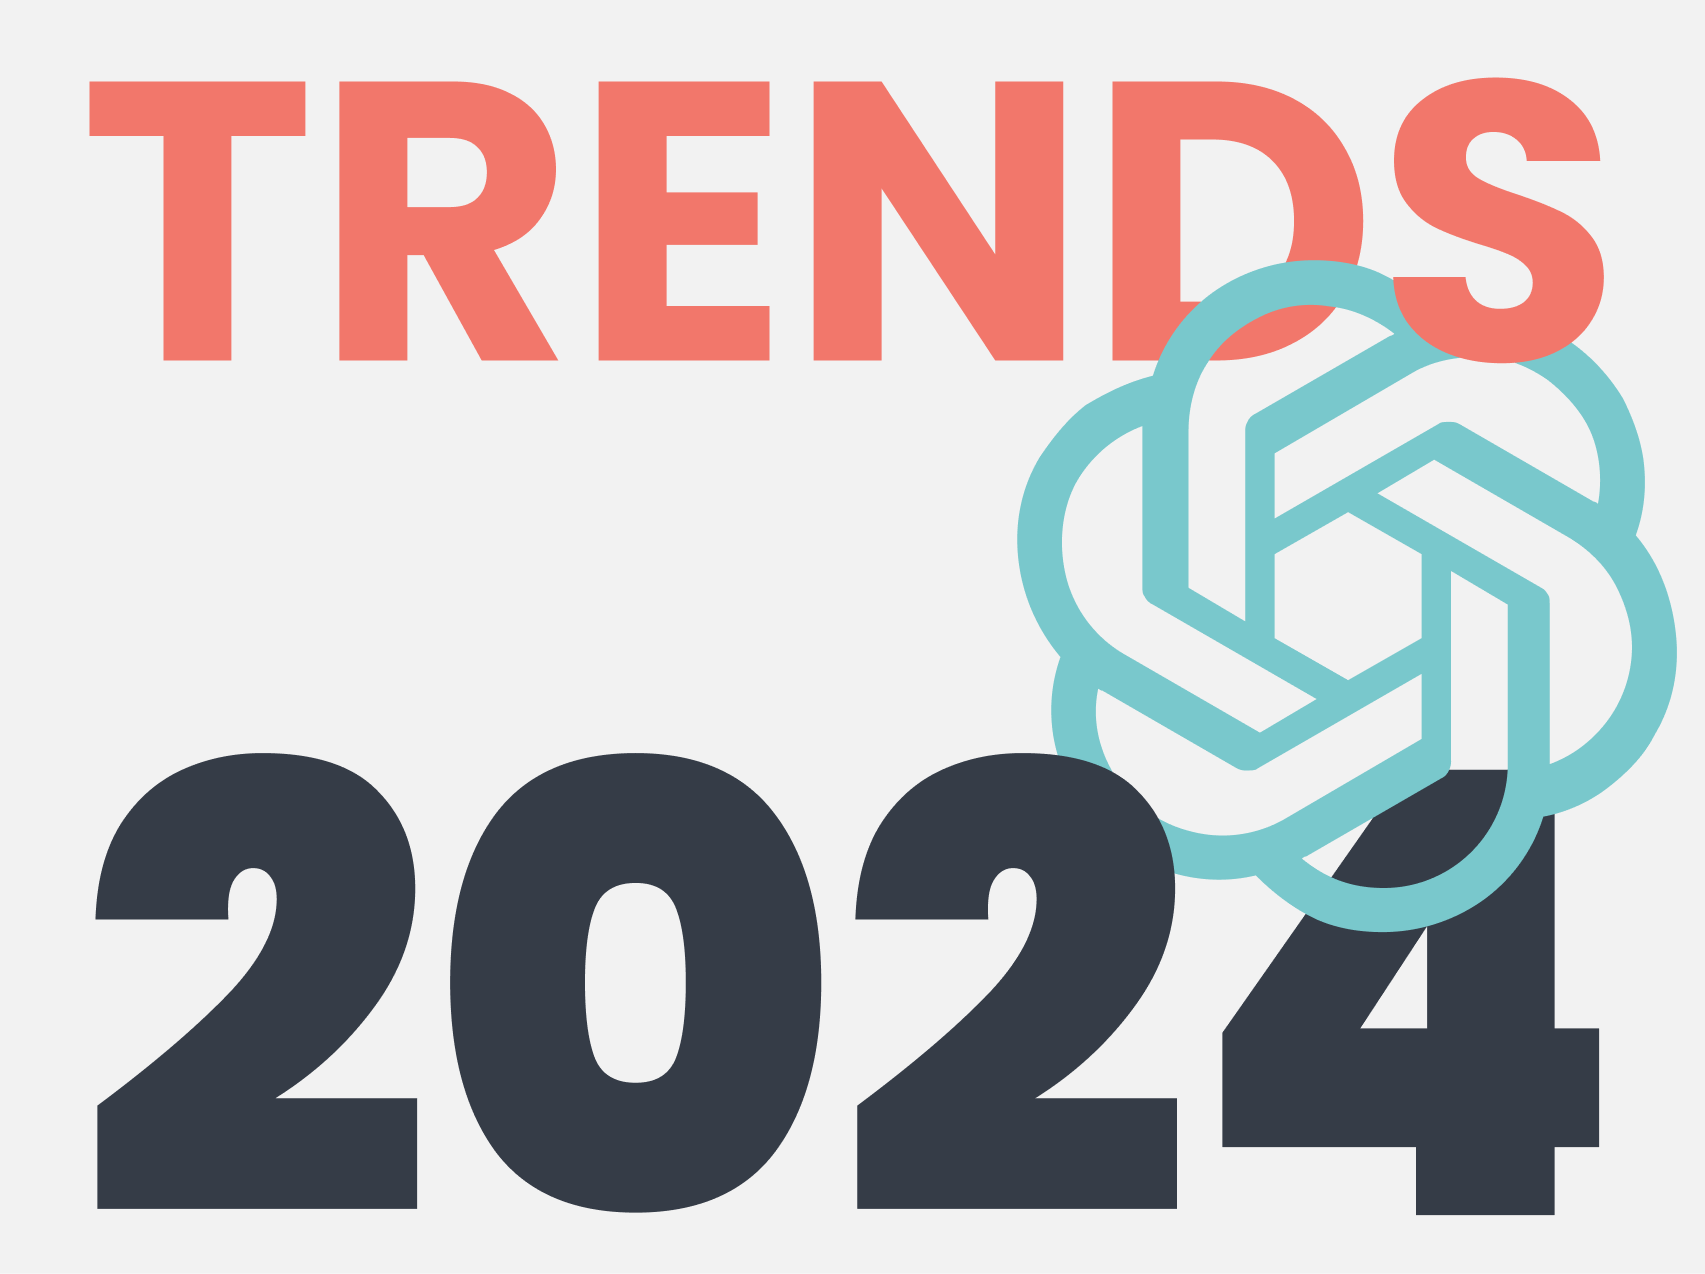 At the picture - Trends 2024, Logo of Open.AI